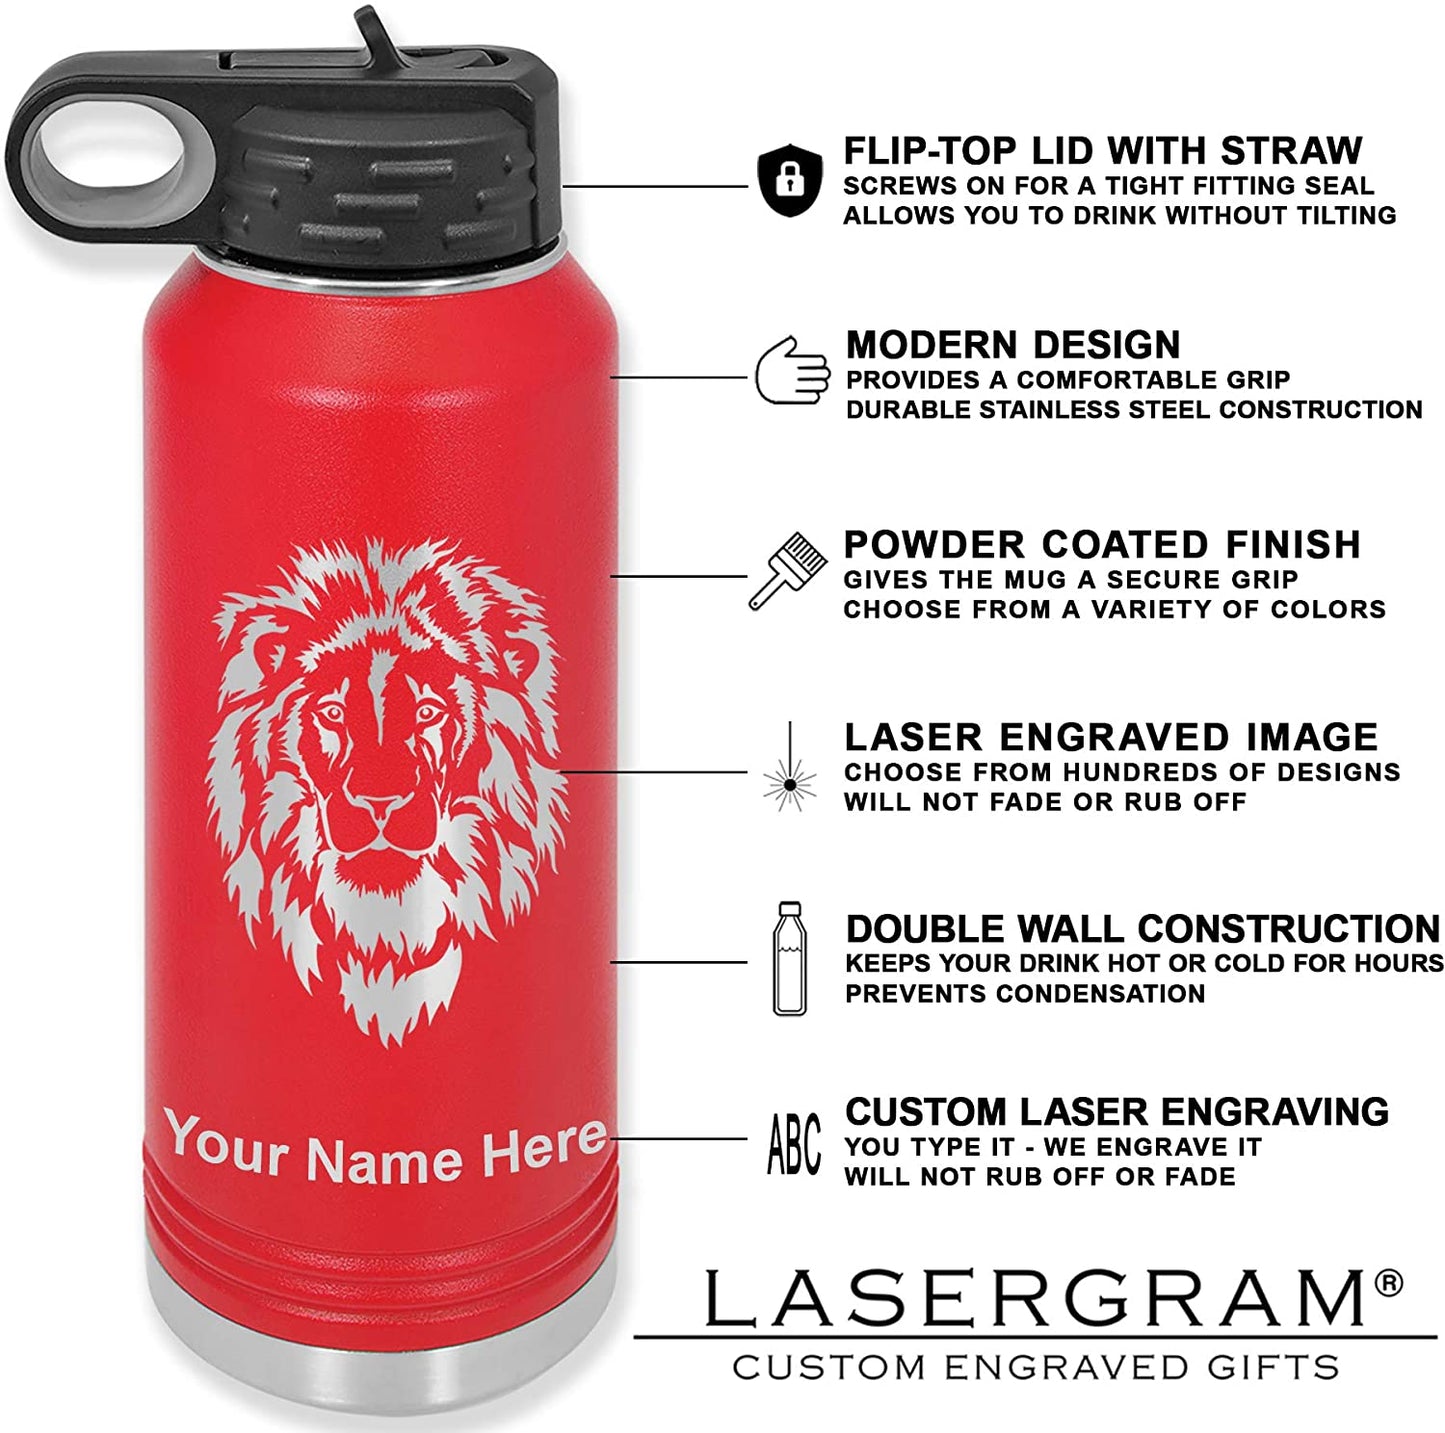 LaserGram 32oz Double Wall Flip Top Water Bottle with Straw, Zodiac Sign Cancer, Personalized Engraving Included